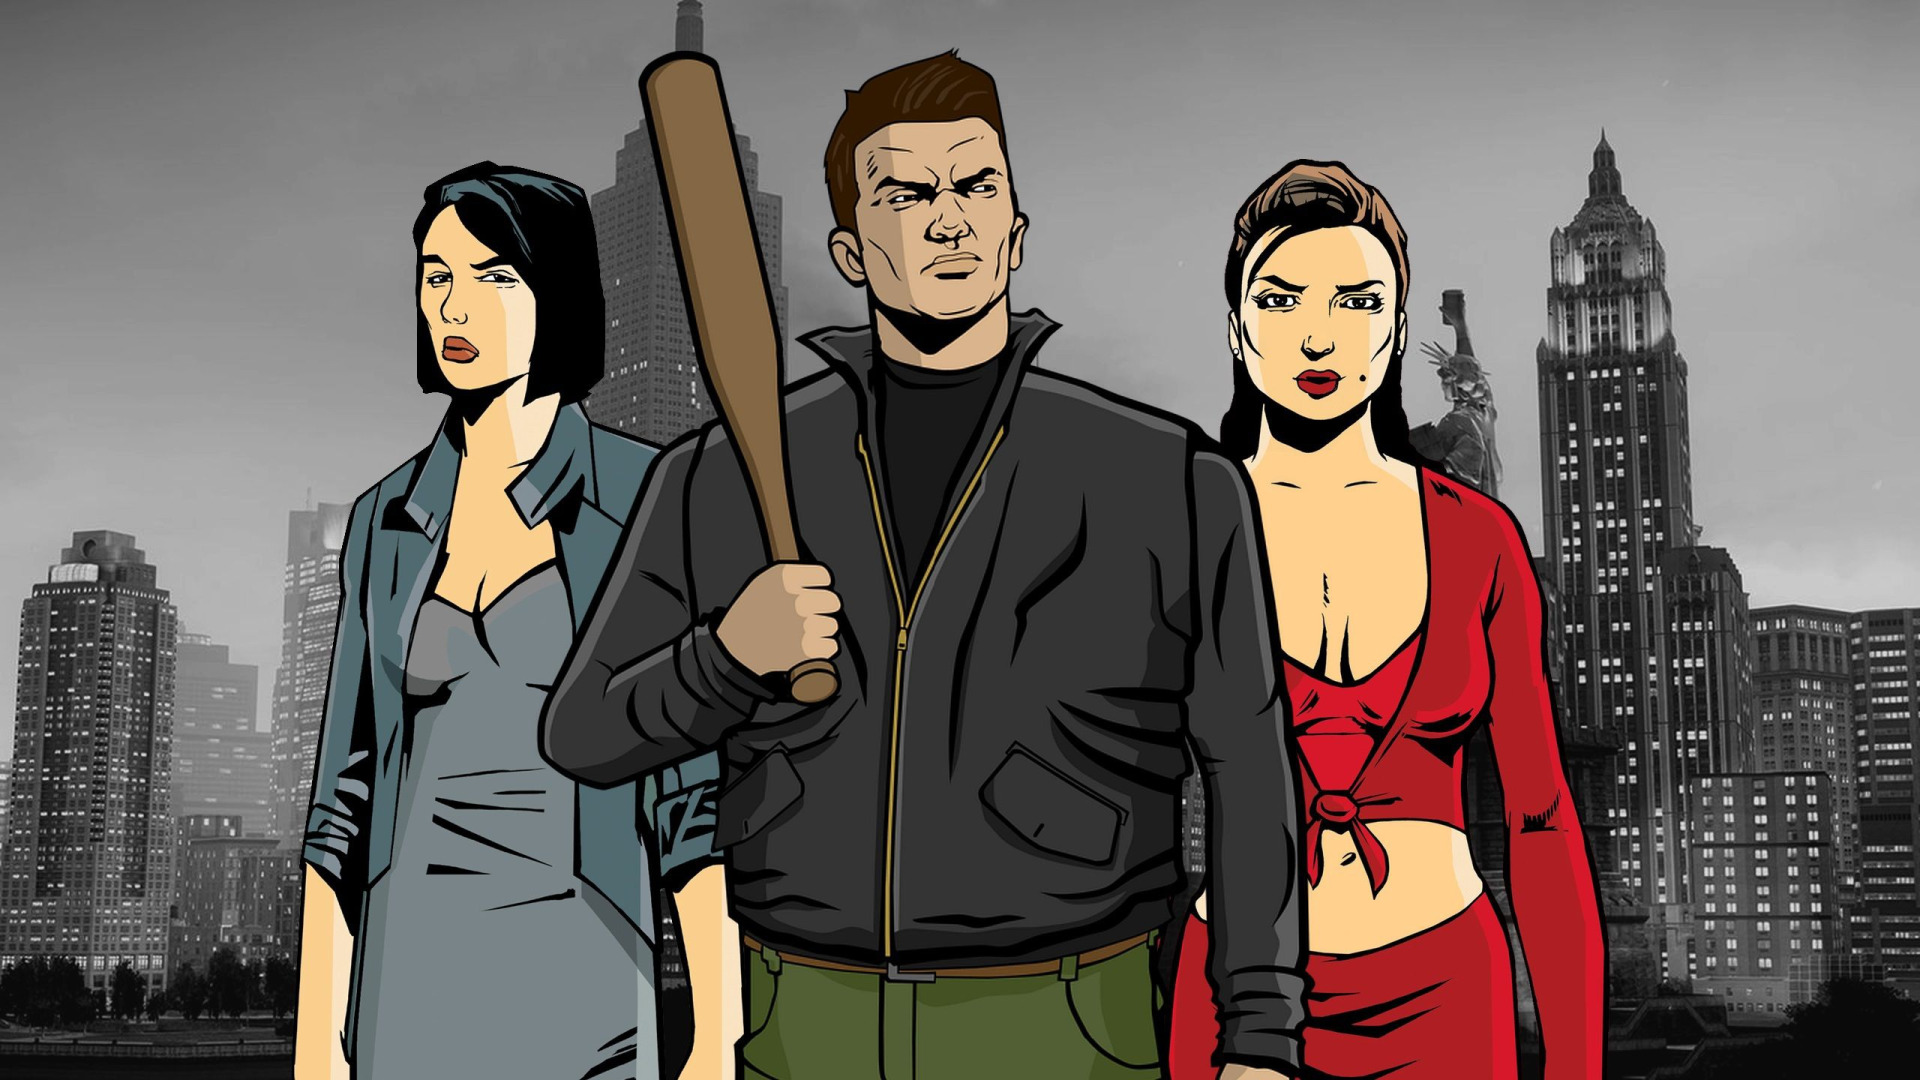 GTA 3 Artworks & Wallpapers  Grand Theft Auto III Images